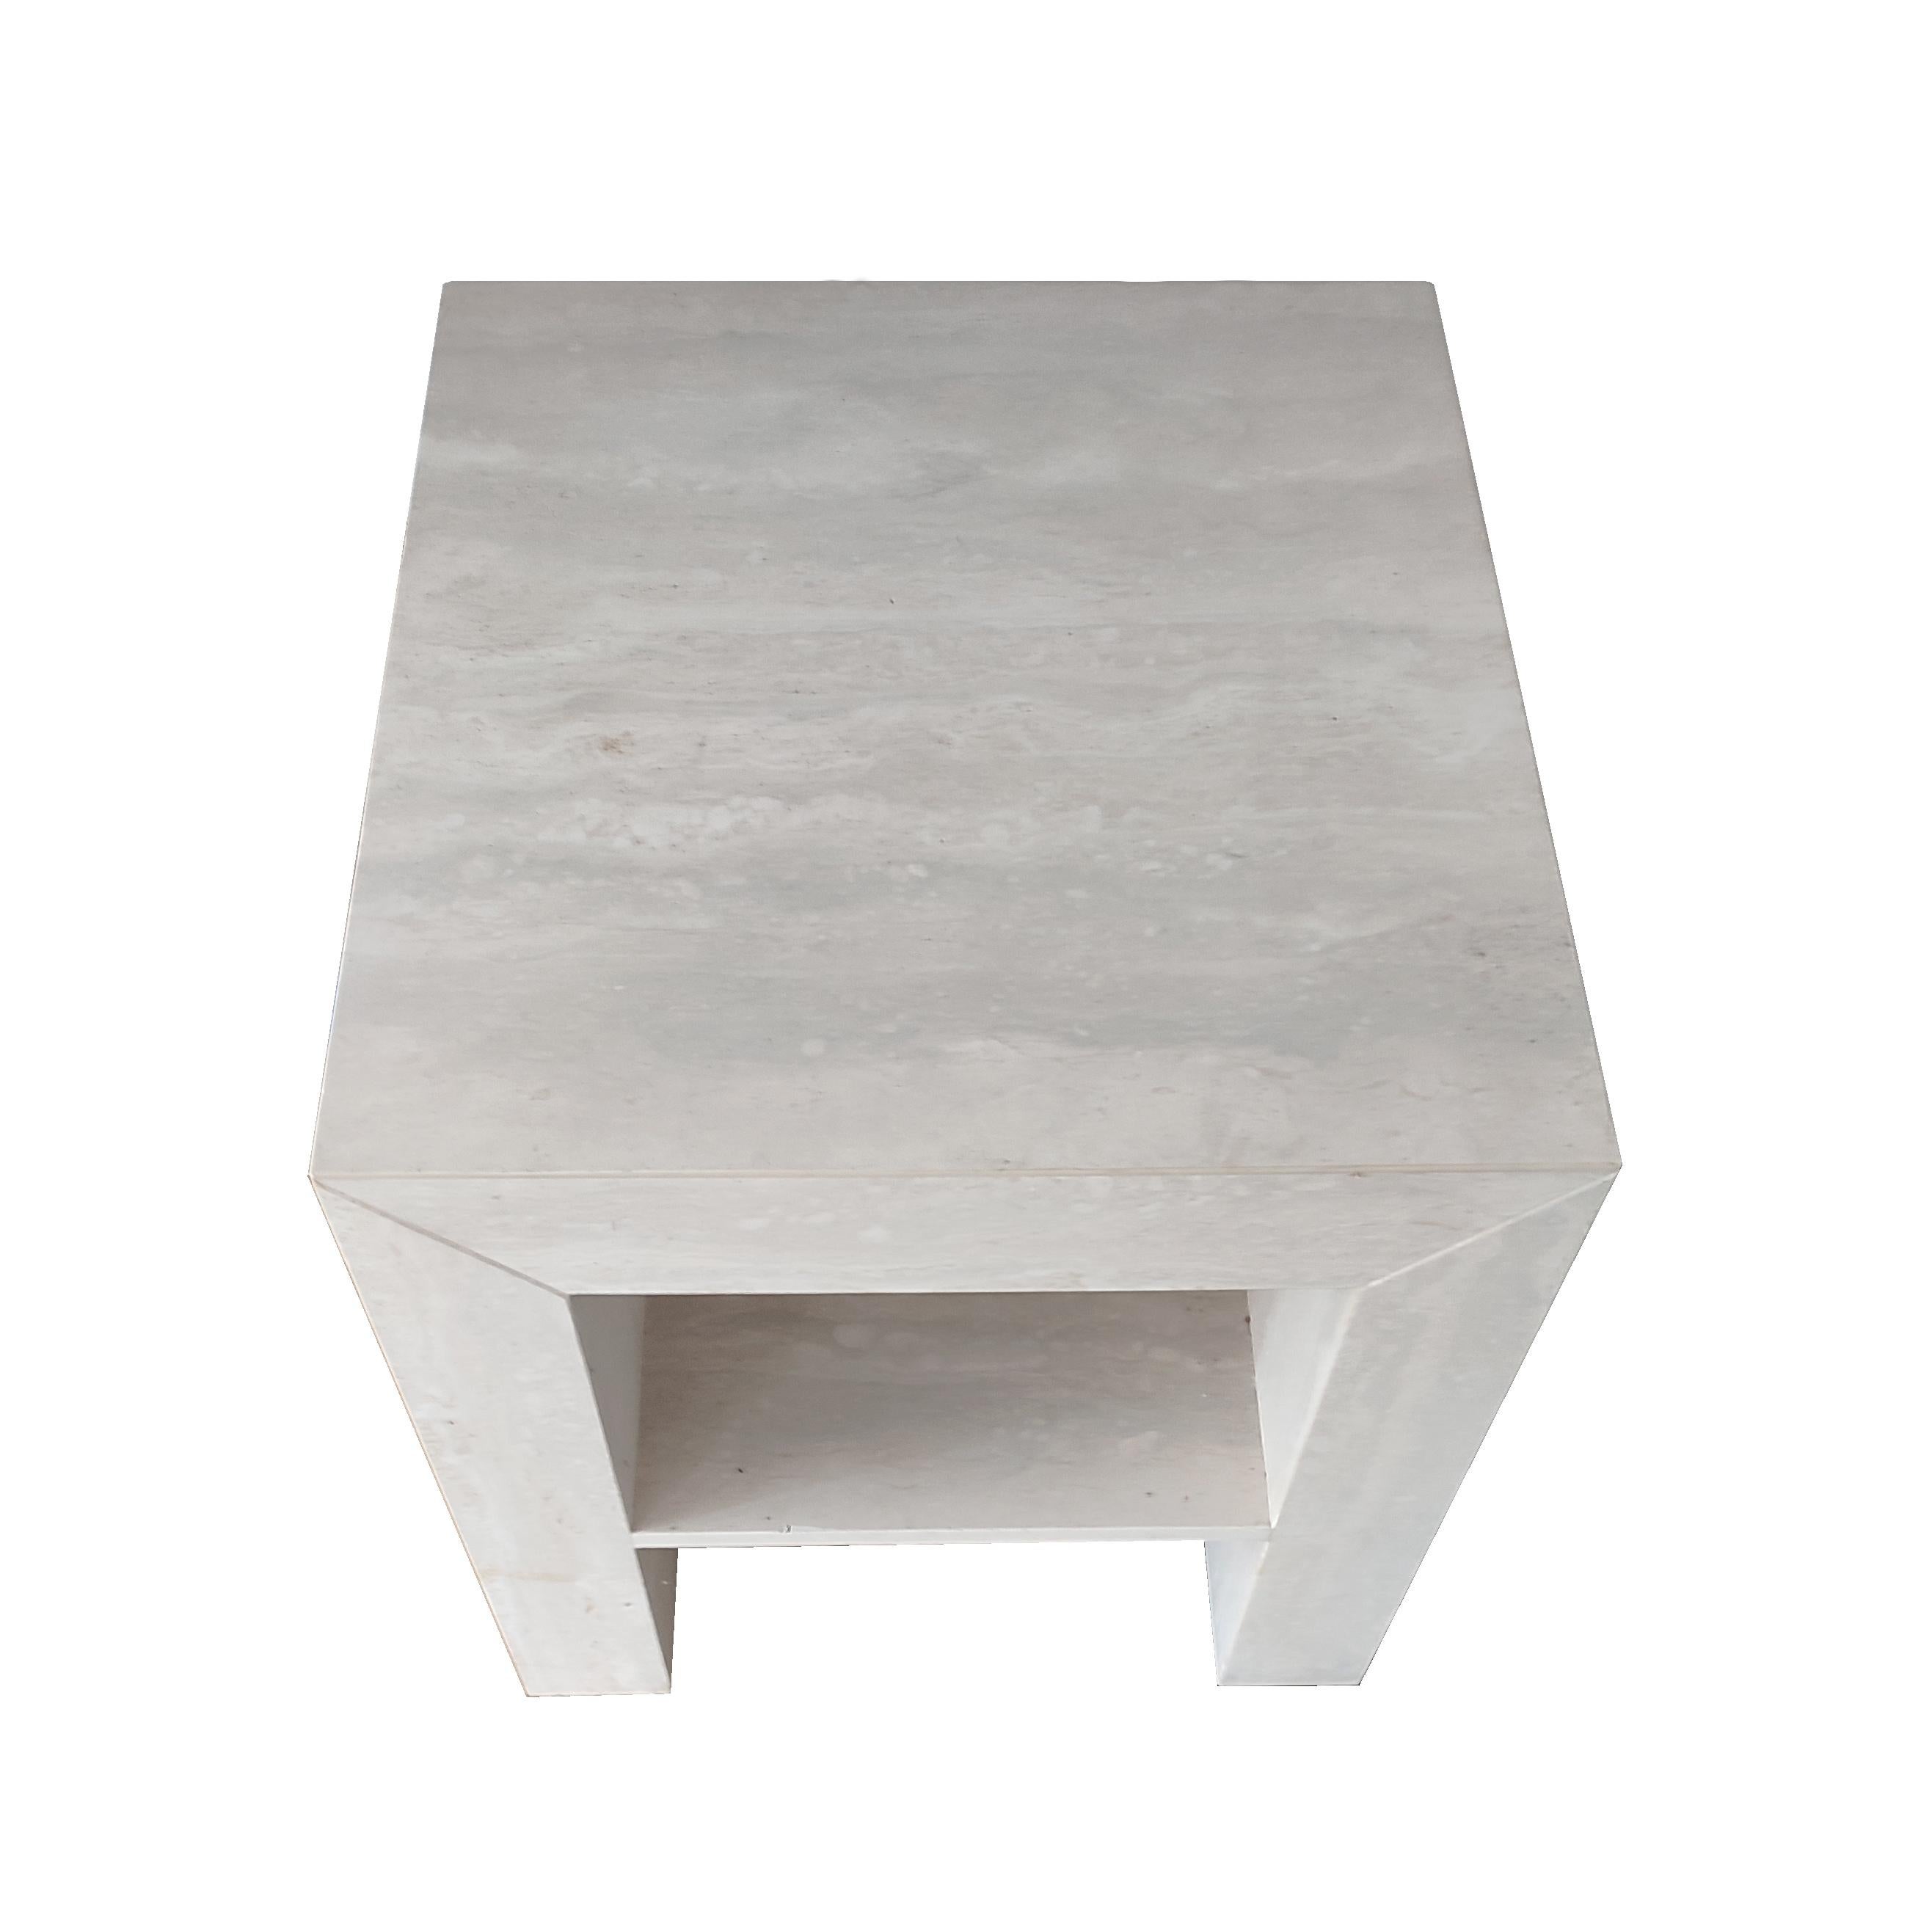 BAO Side Travertine Marble Design Table by Meddel Spain Joaquín Moll In Stock
This travertine marble design side table is a regular piece, with a simple and very functional design. Its structure has an inverted 